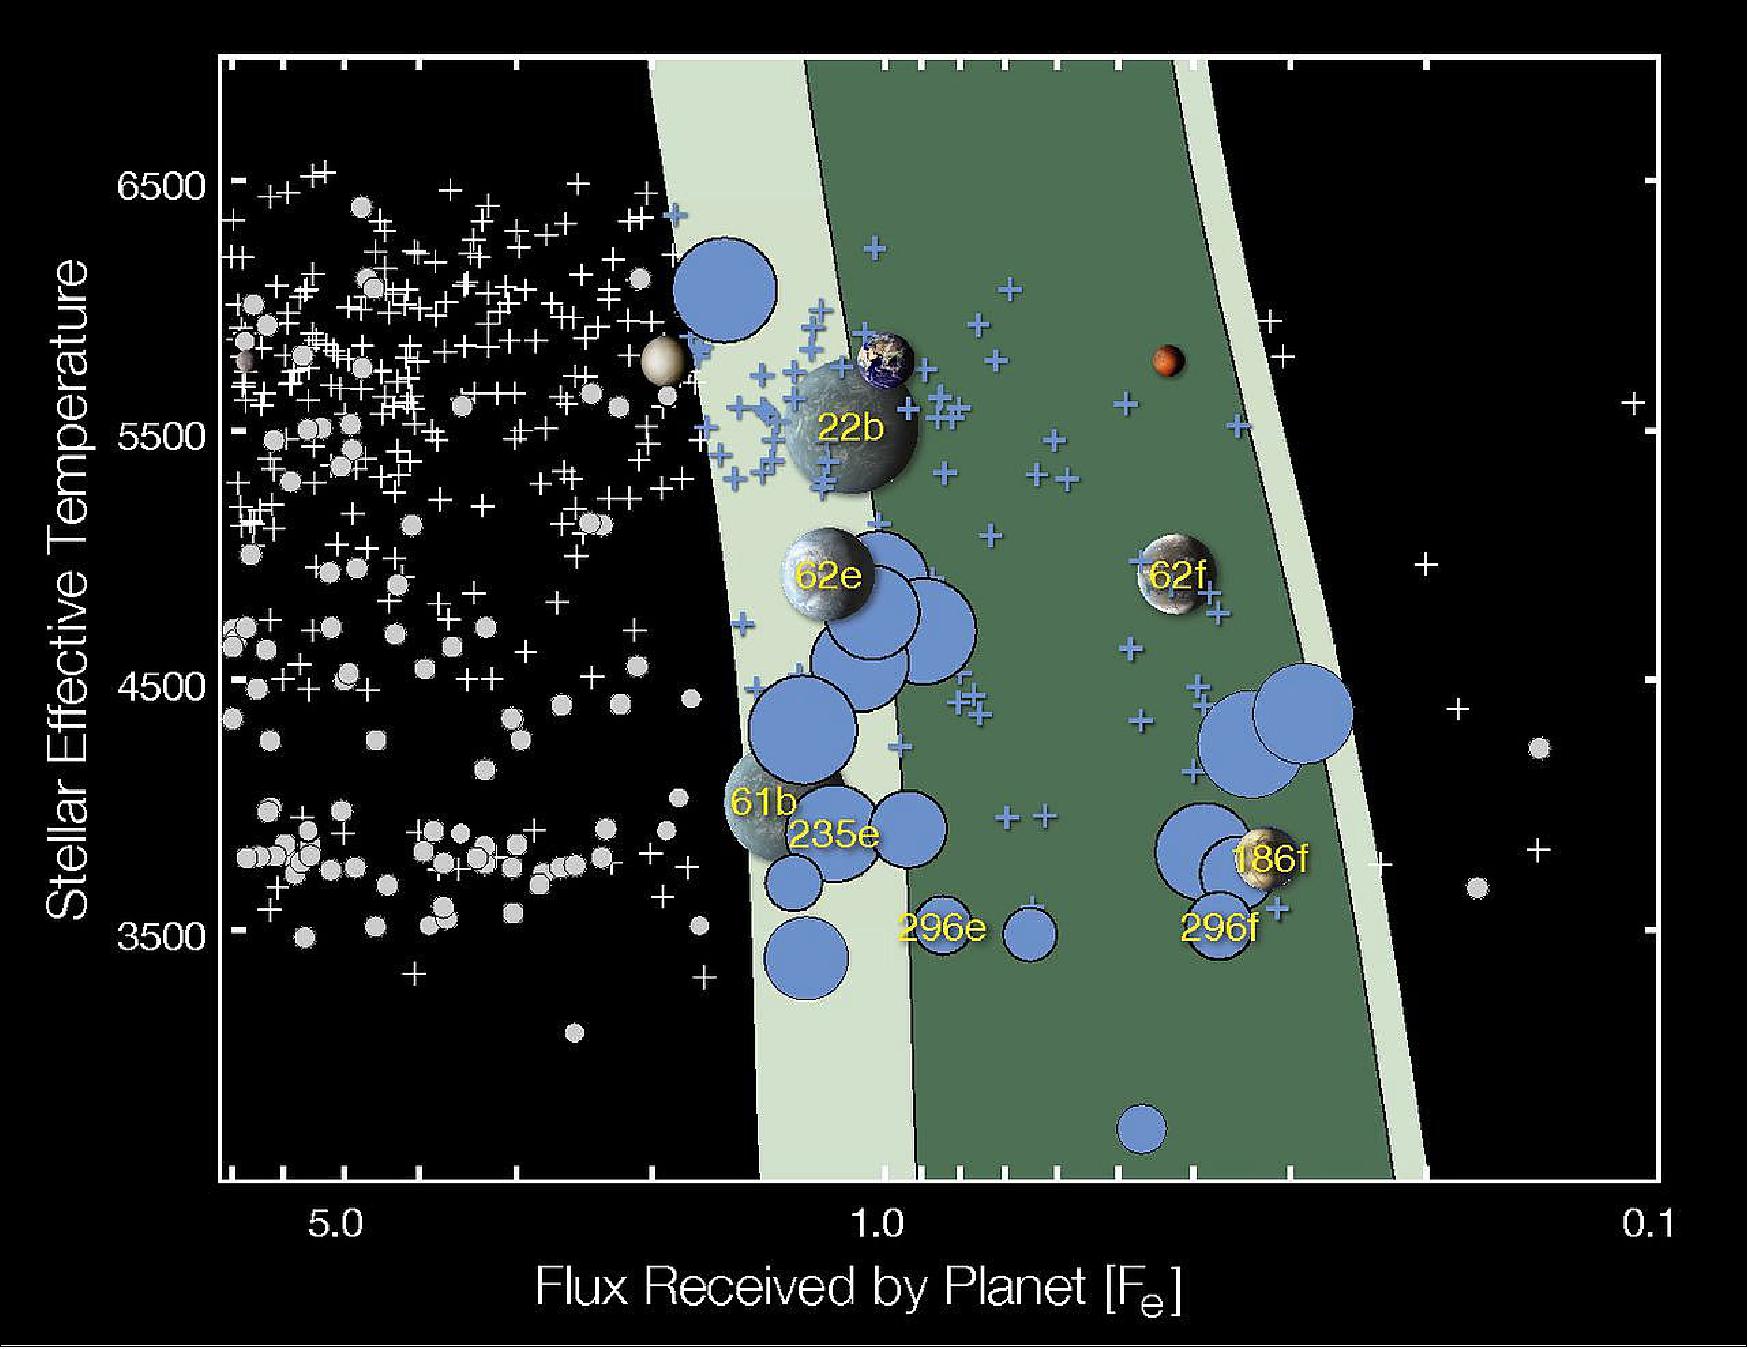 Figure 57: Stellar effective temperature versus insolation (stellar flux at the semimajor axis) for Kepler exoplanets larger than 2 R⊗ (plusses) and smaller than 2 R⊗ (circles). Symbols are colored blue if they lie within the HZ and are sized relative to the Earth (represented by a superimposed image) if they represent a planet smaller than 2 R⊗. The confirmed HZ exoplanets (Kepler-22b, Kepler-62 e and f, Kepler-61b, and Kepler-186f) are displayed as the artist’s conceptions (image credit: NASA/ARC, Natalie M. Batalha)